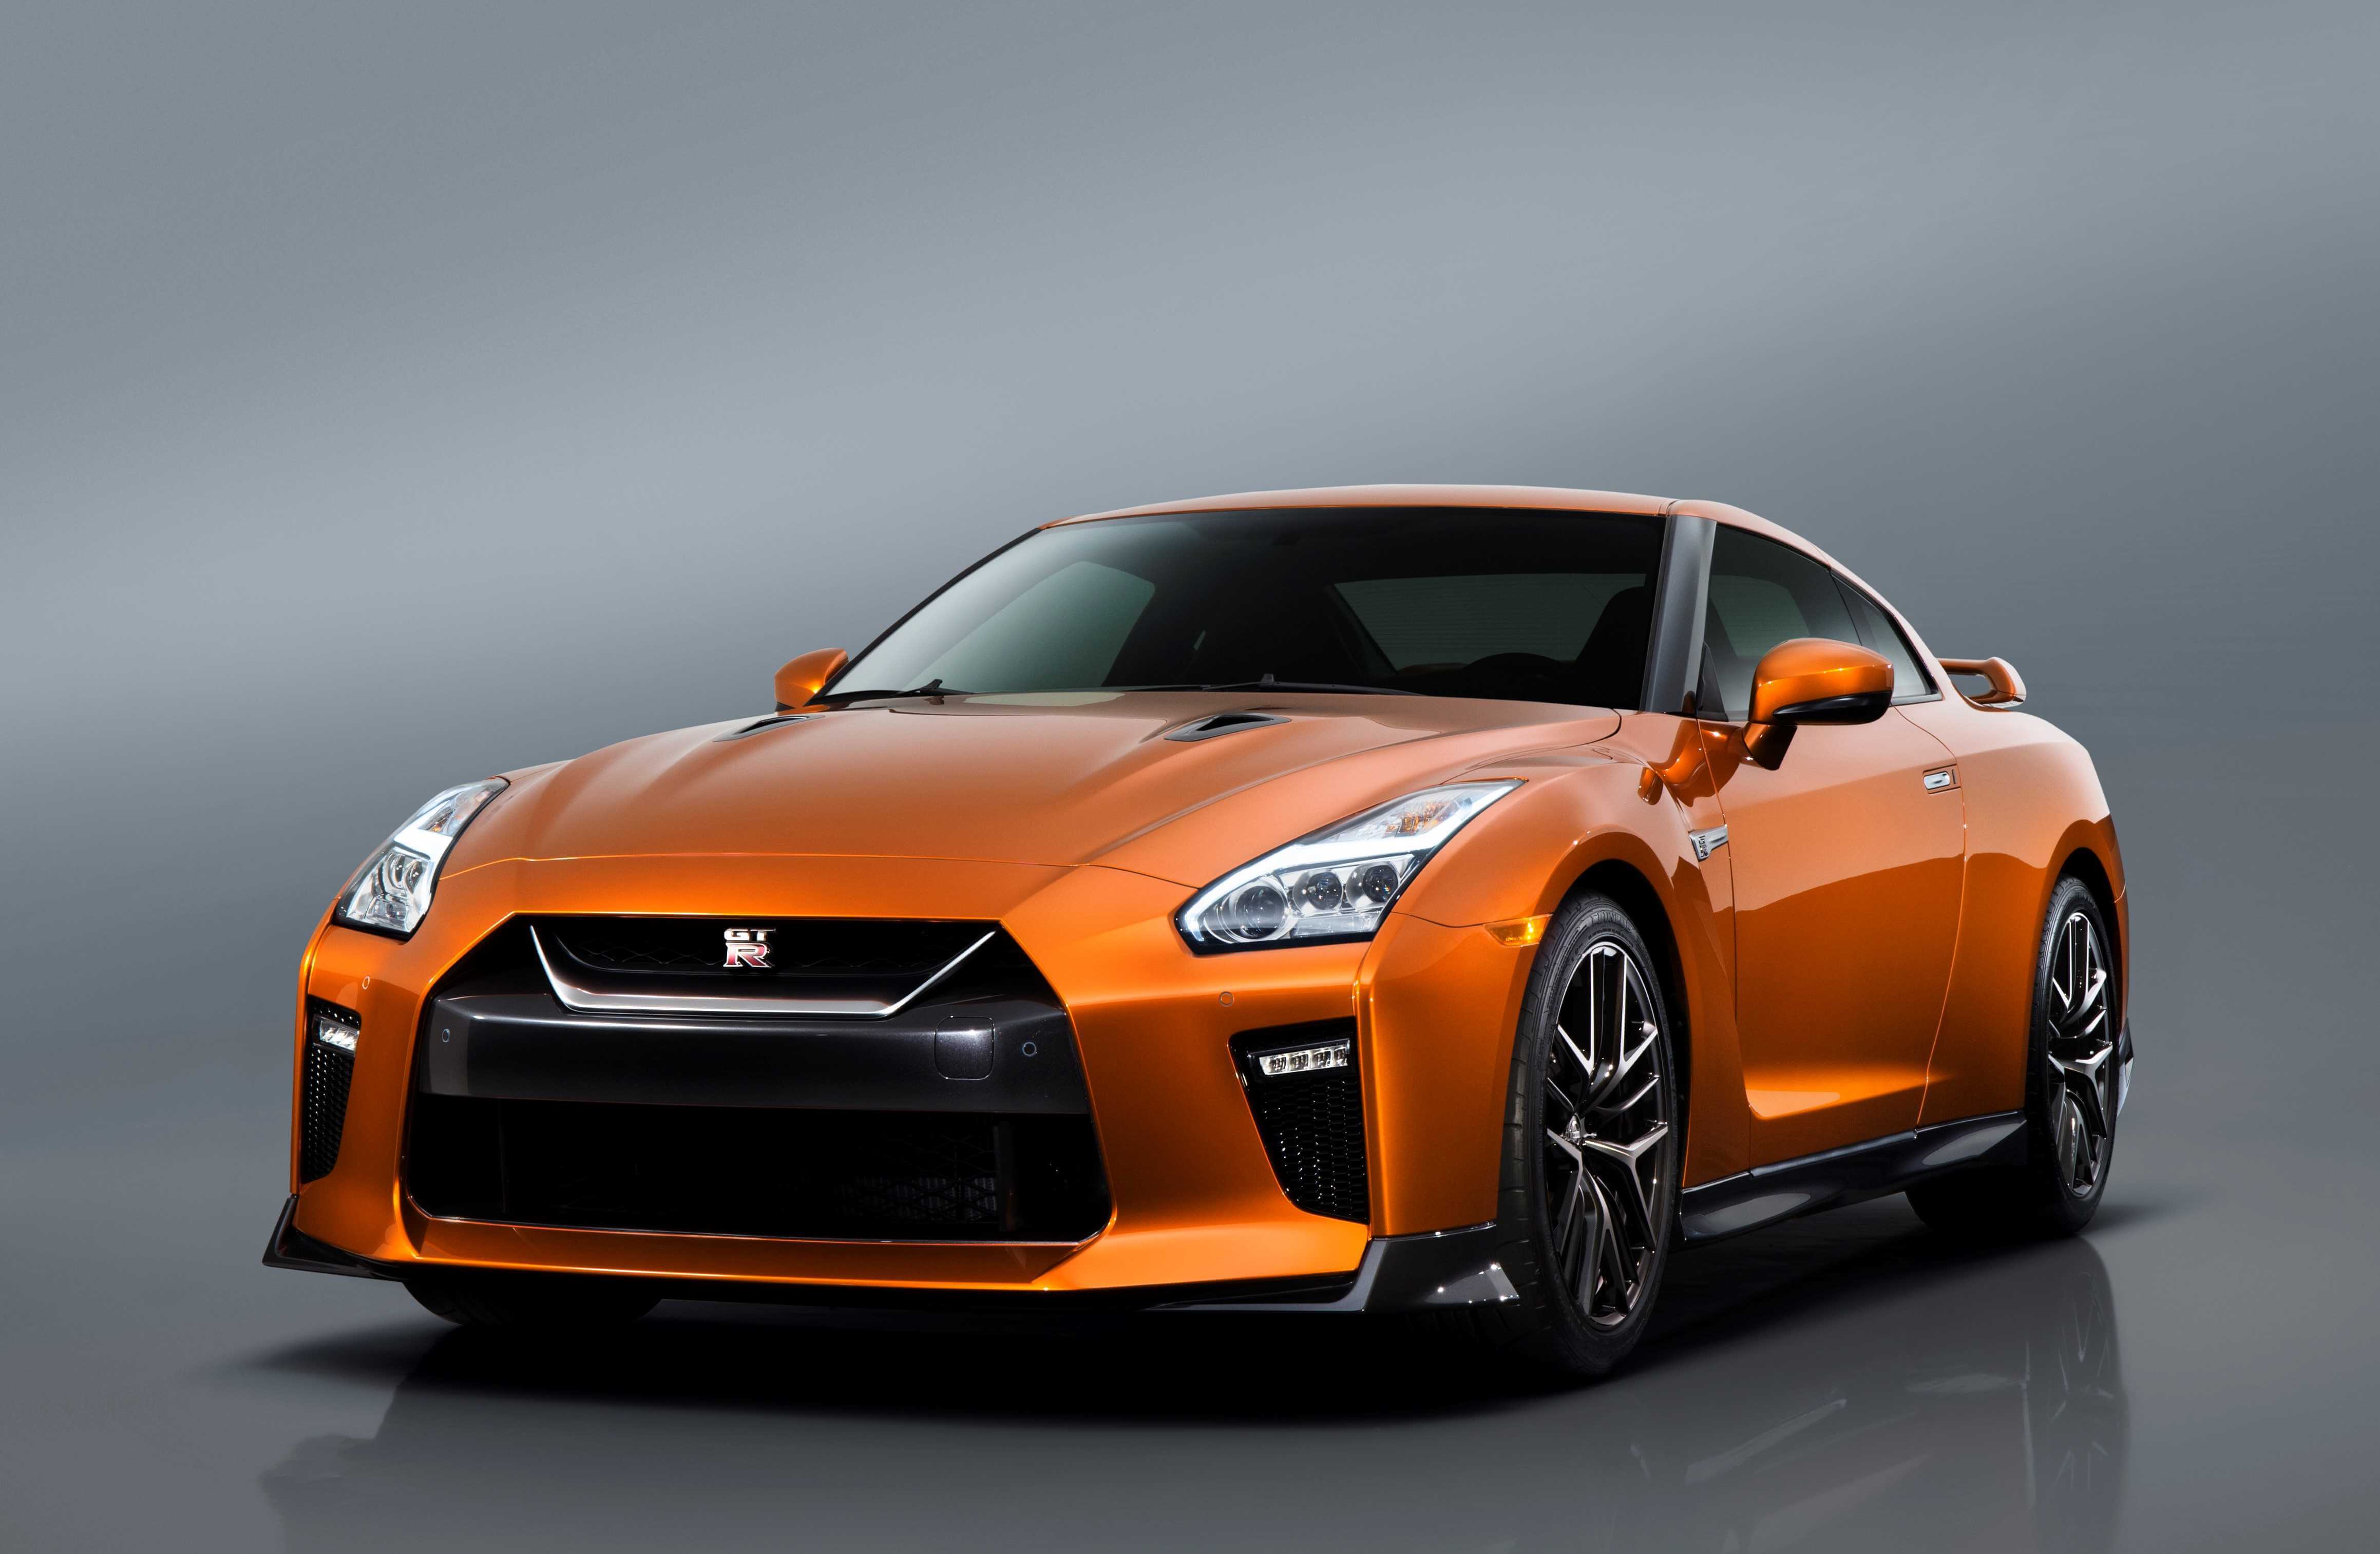 The Nissan GT-R, Goliath or Godzilla - whatever you call it, it's still an icon